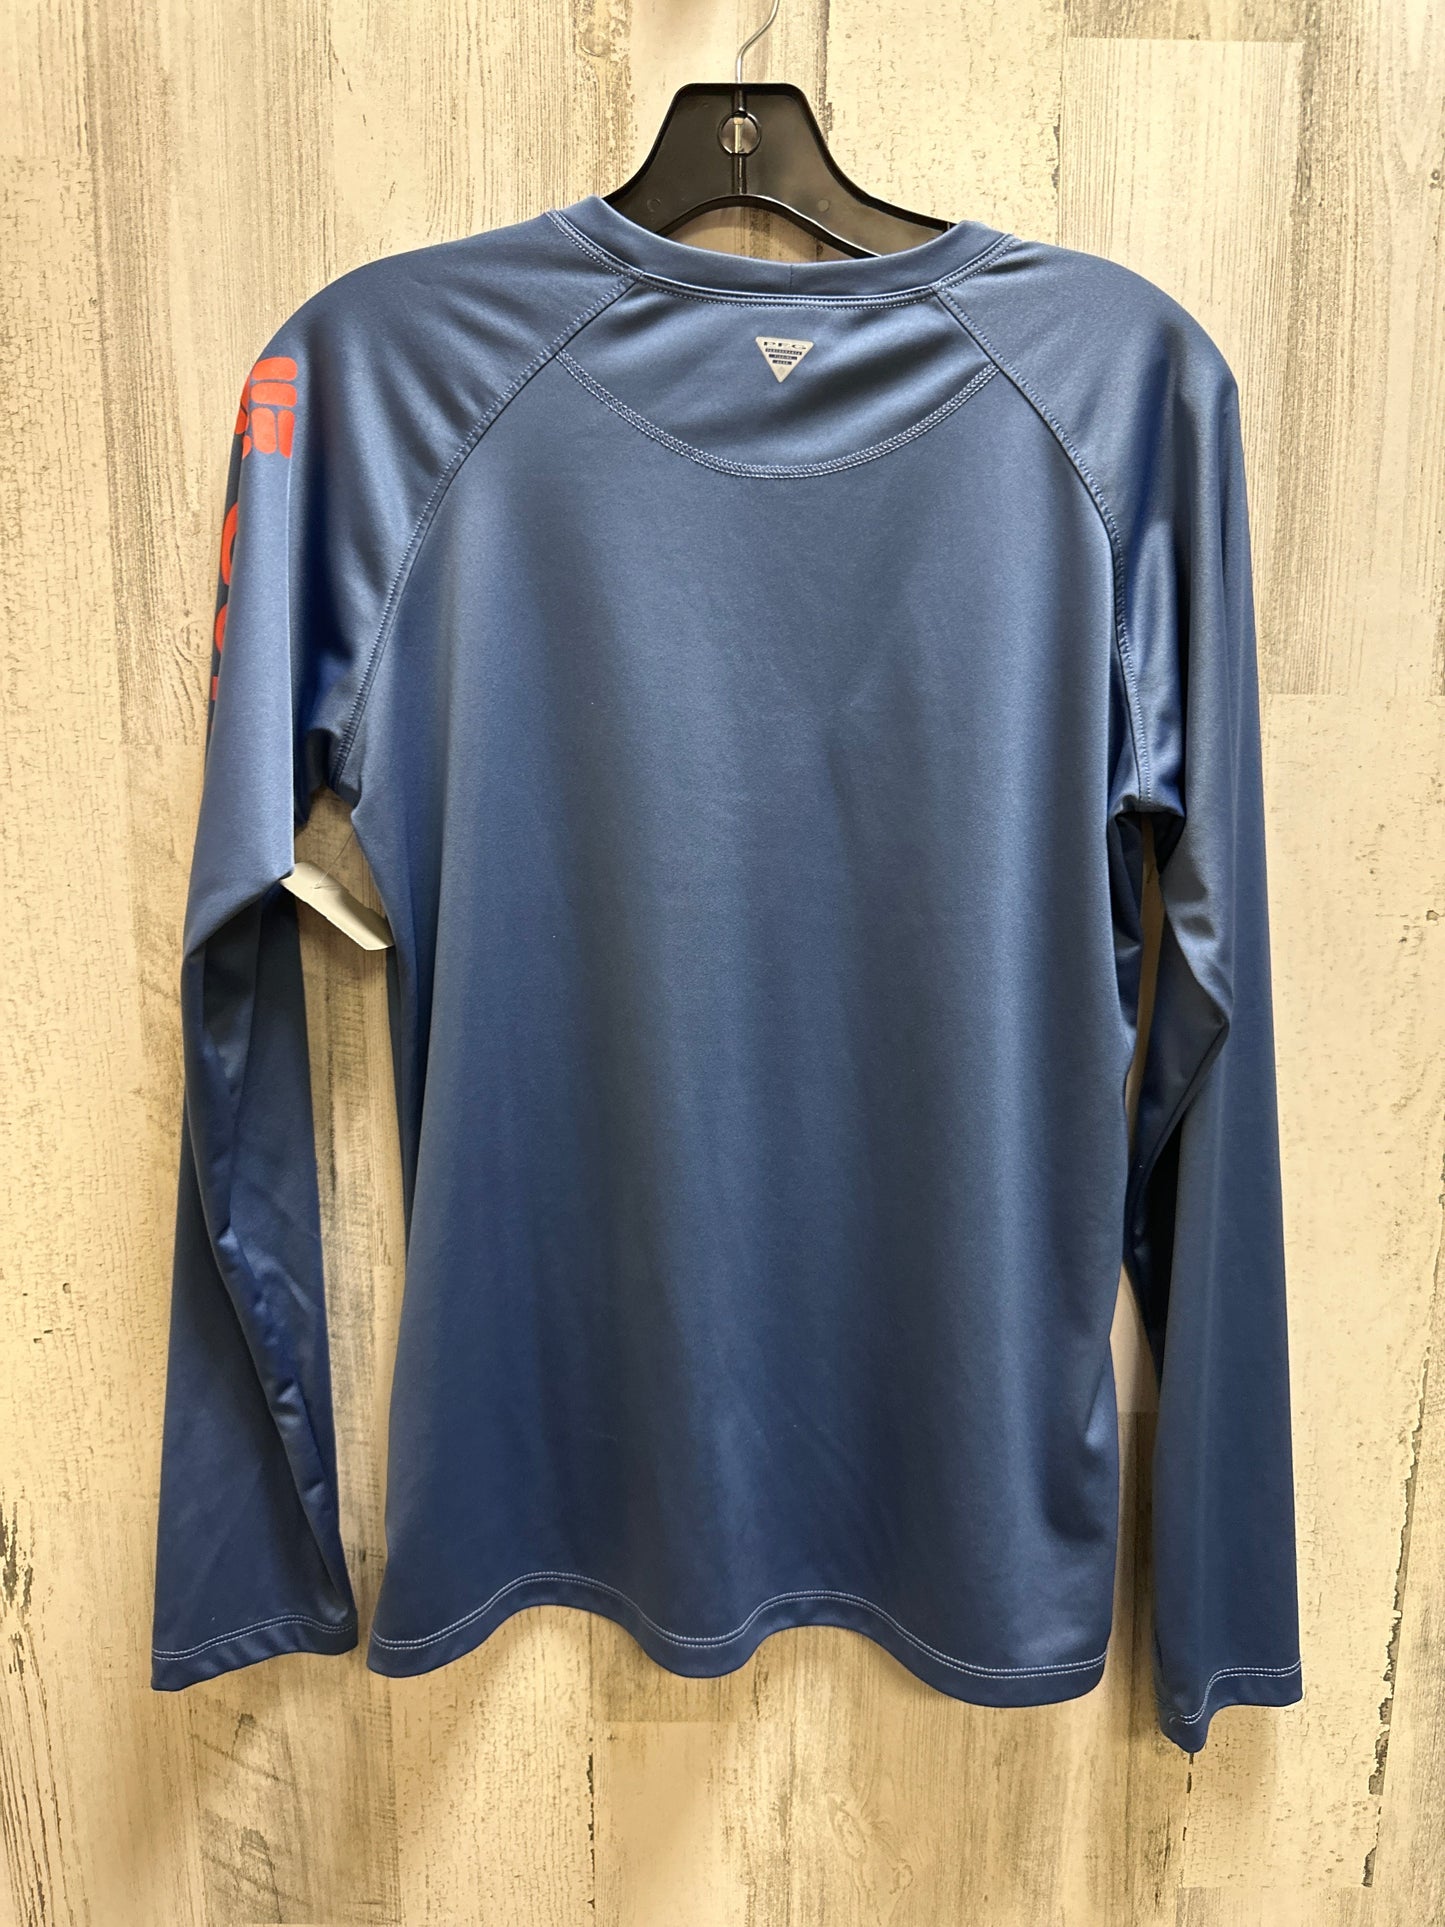 Athletic Top Long Sleeve Crewneck By Columbia  Size: M